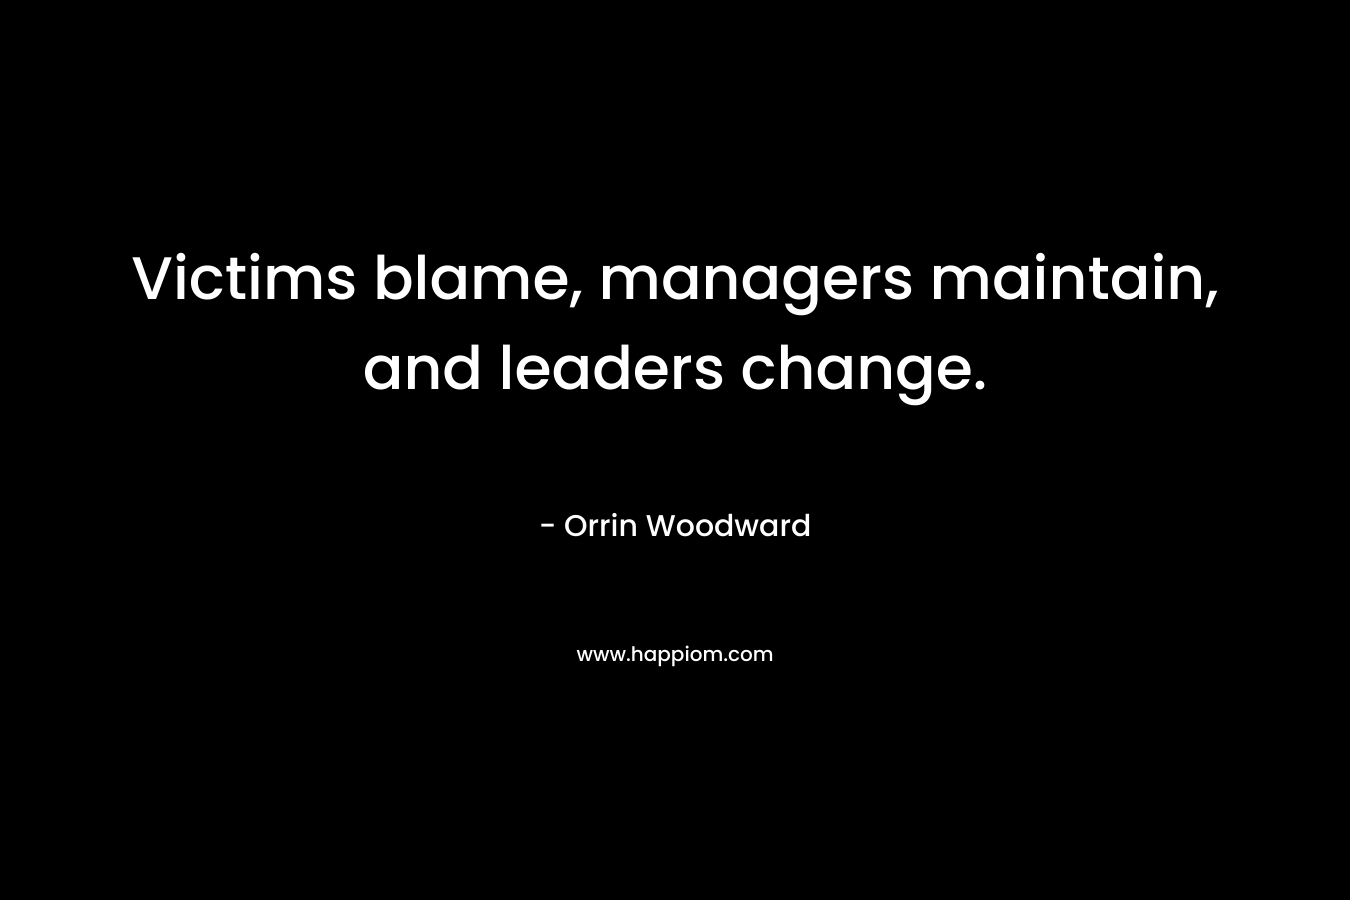 Victims blame, managers maintain, and leaders change. – Orrin Woodward